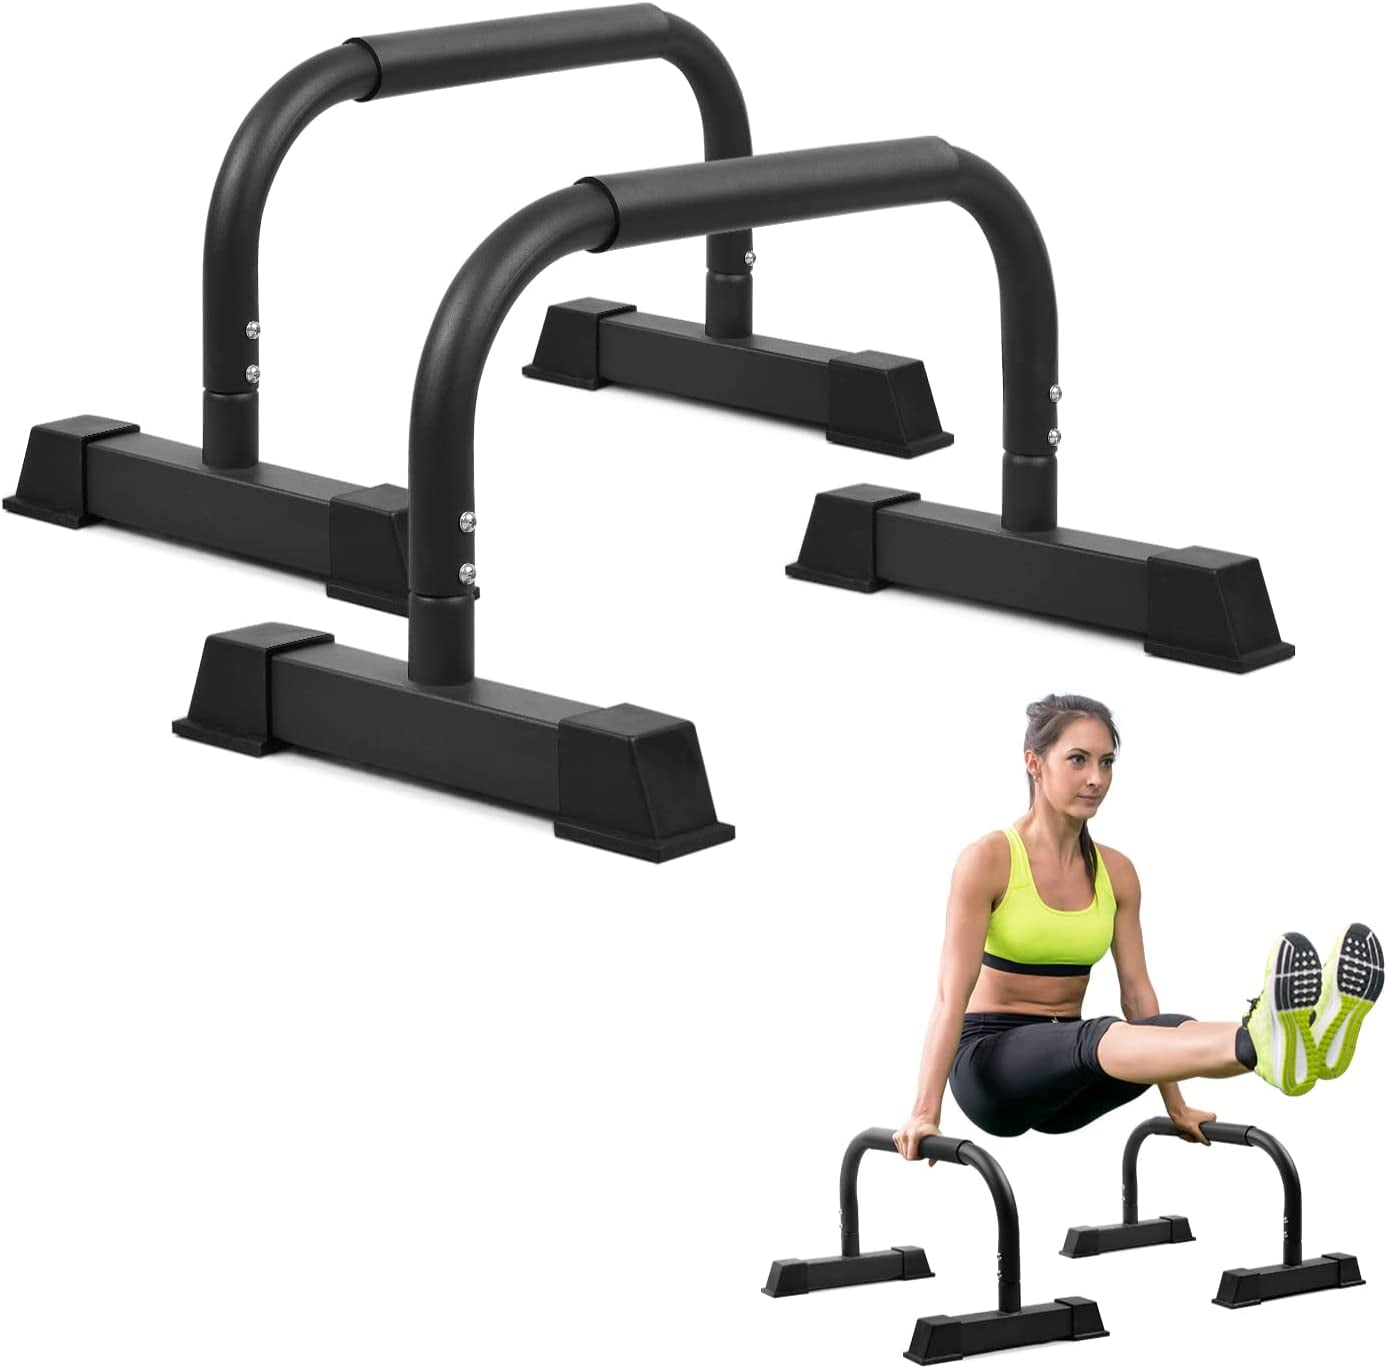 Fitness Equipment Push Up Bars Rotating Stands Skipping Rope Home Gym Workout 